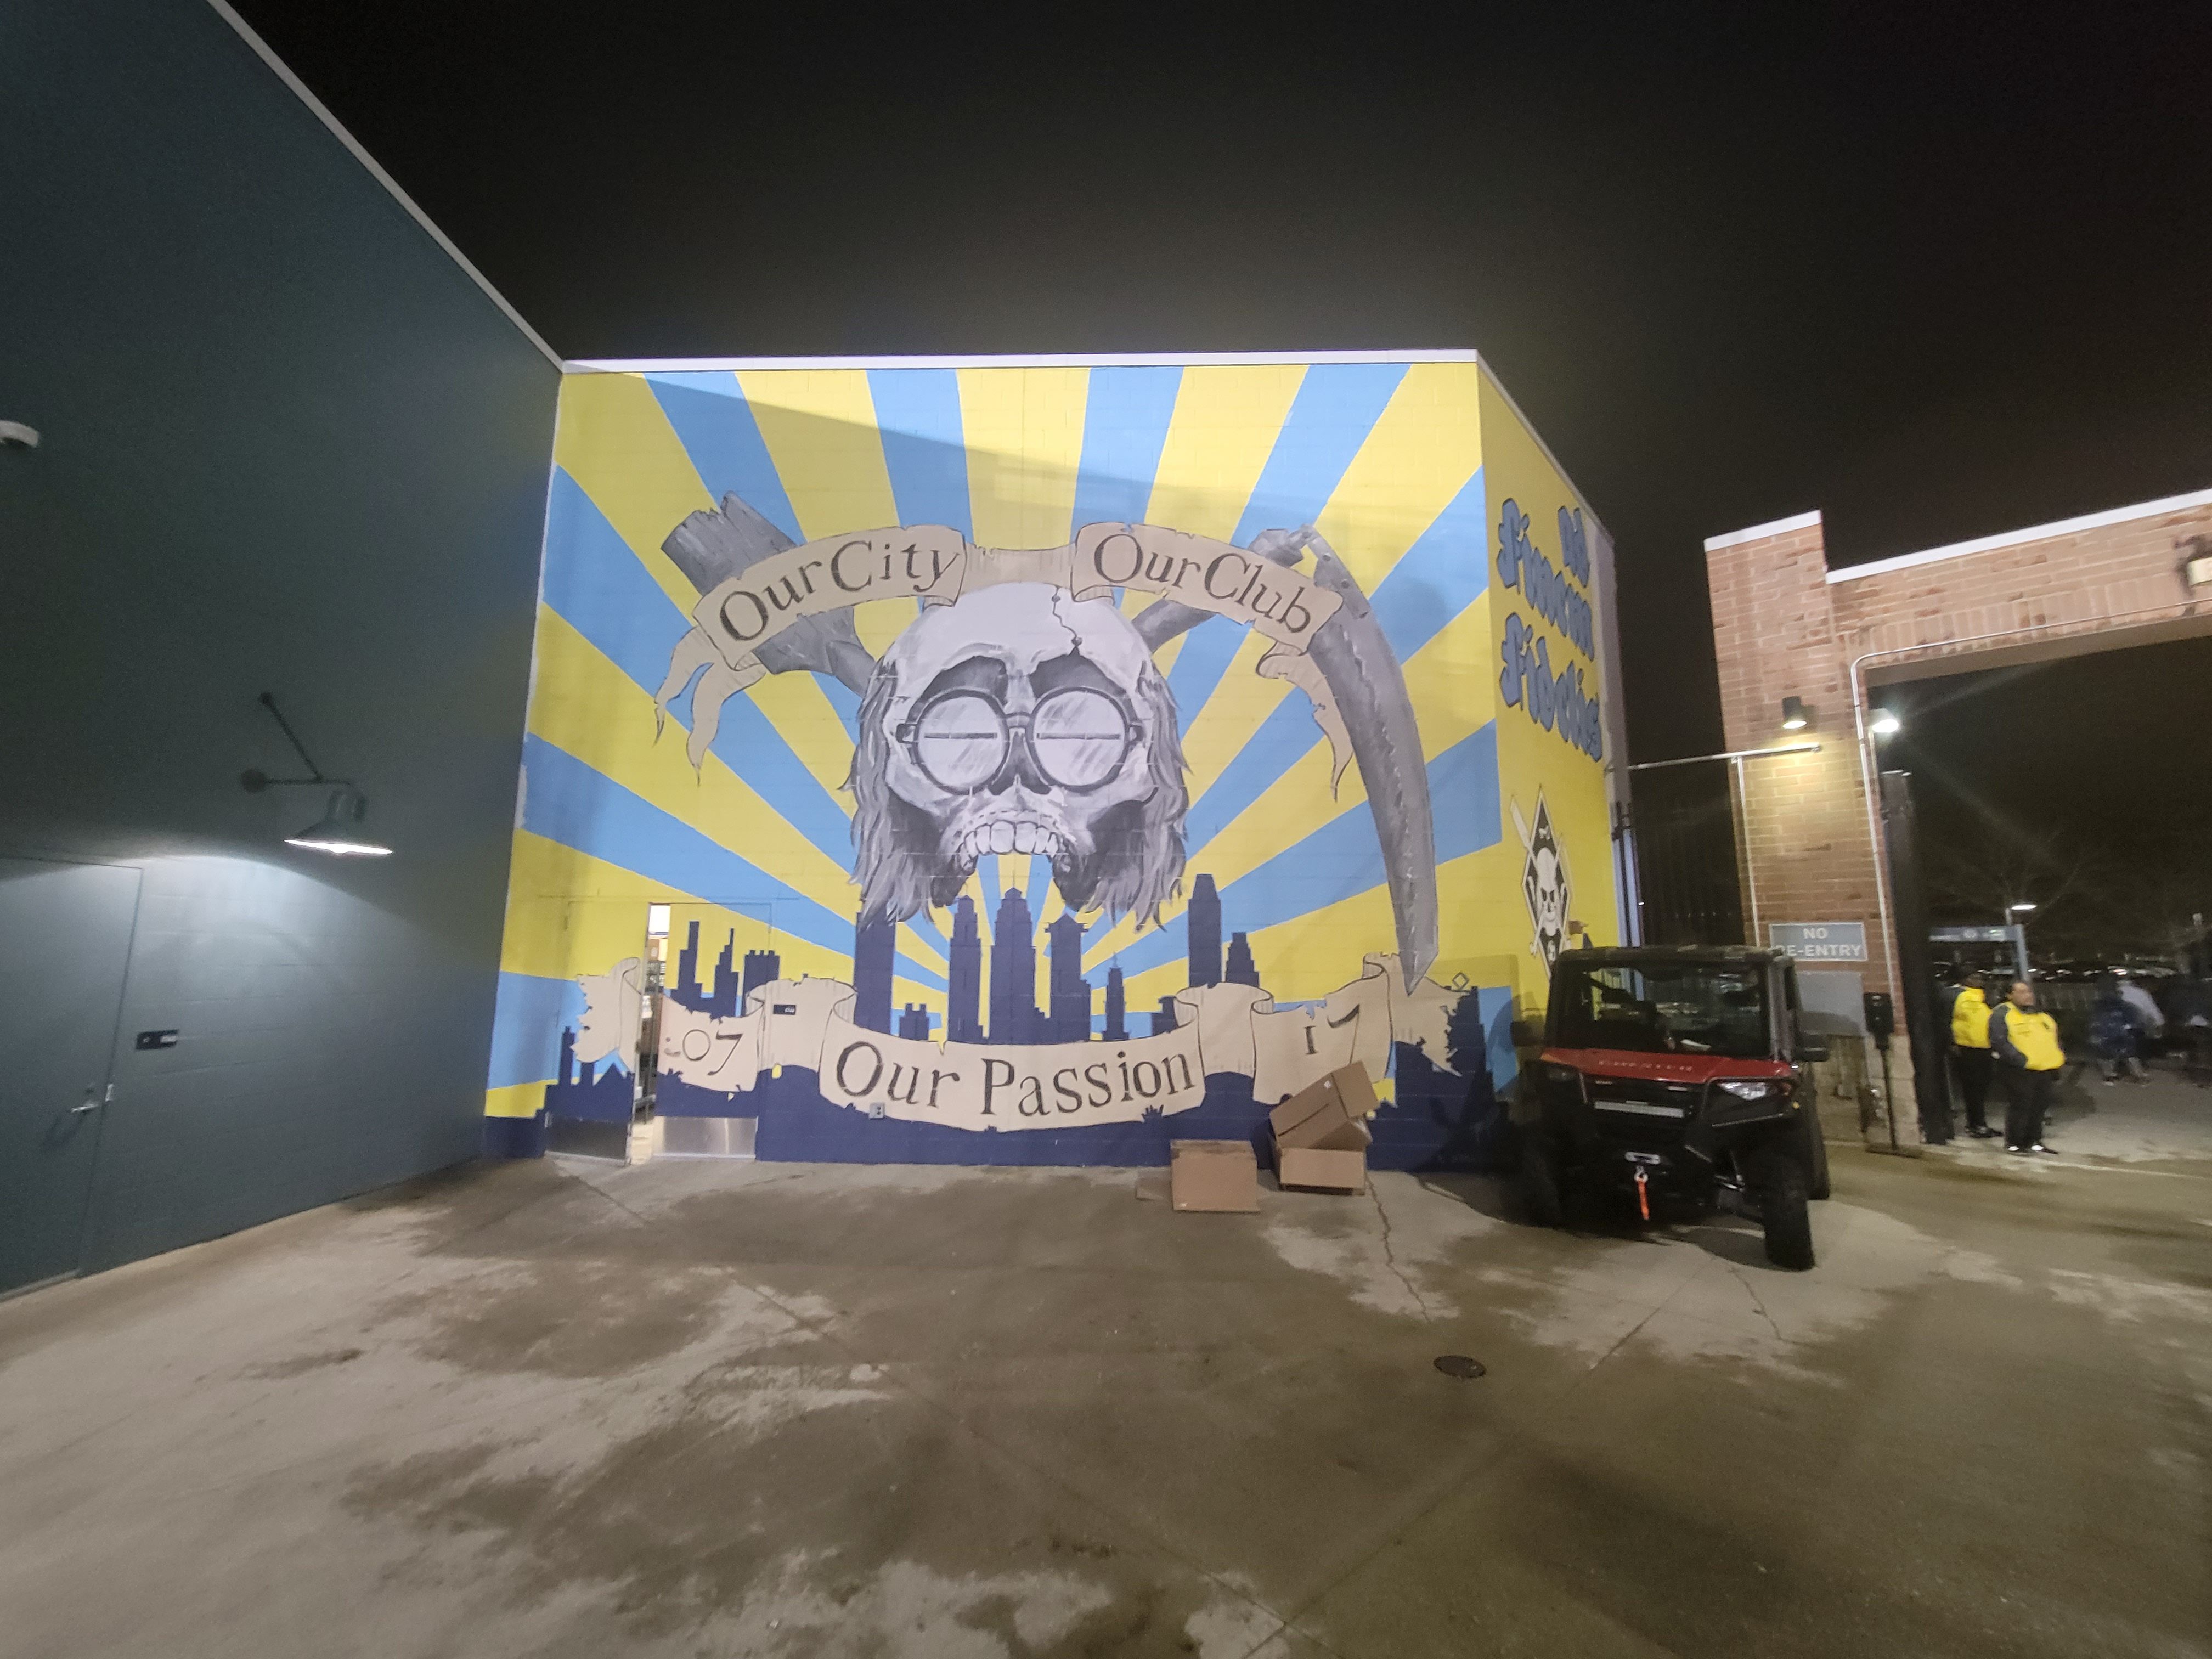 A mural with images of a skull with glasses and a scythe above the Philly skyline, and the motto: "Our city. Our club. Our passion."